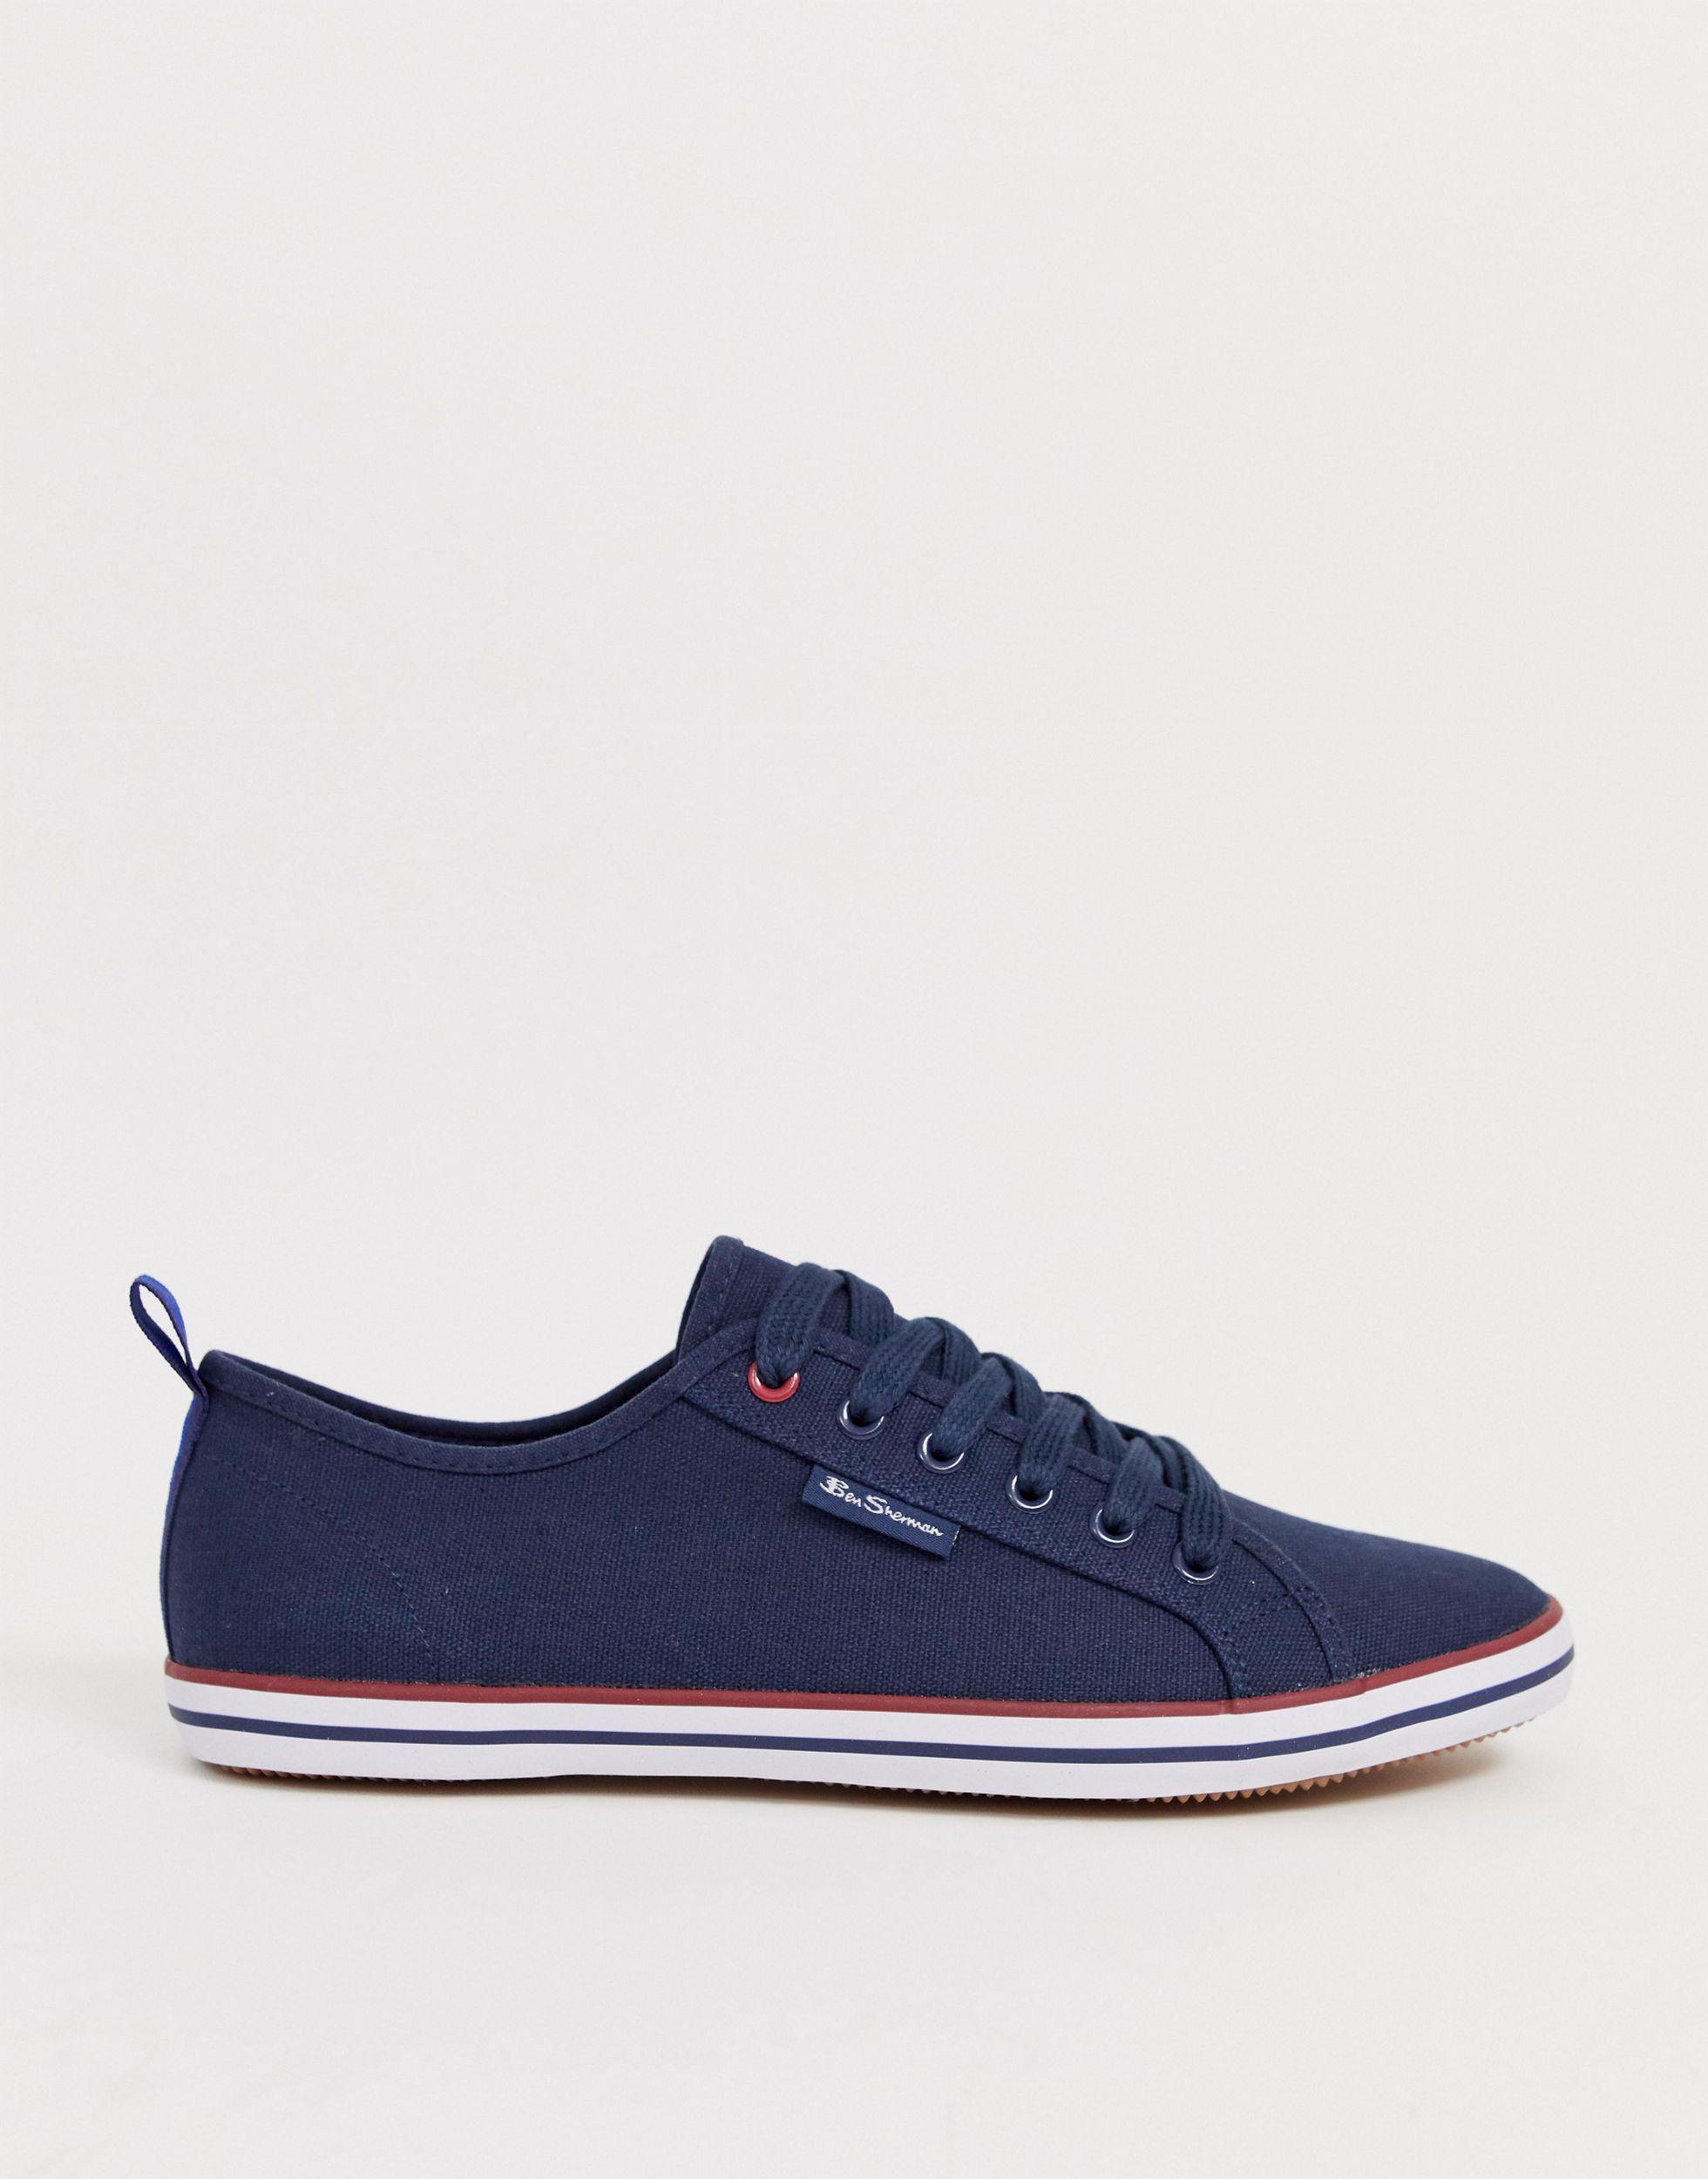 Ben Sherman Canvas Lace Up Plimsolls in Navy (Blue) for Men - Lyst